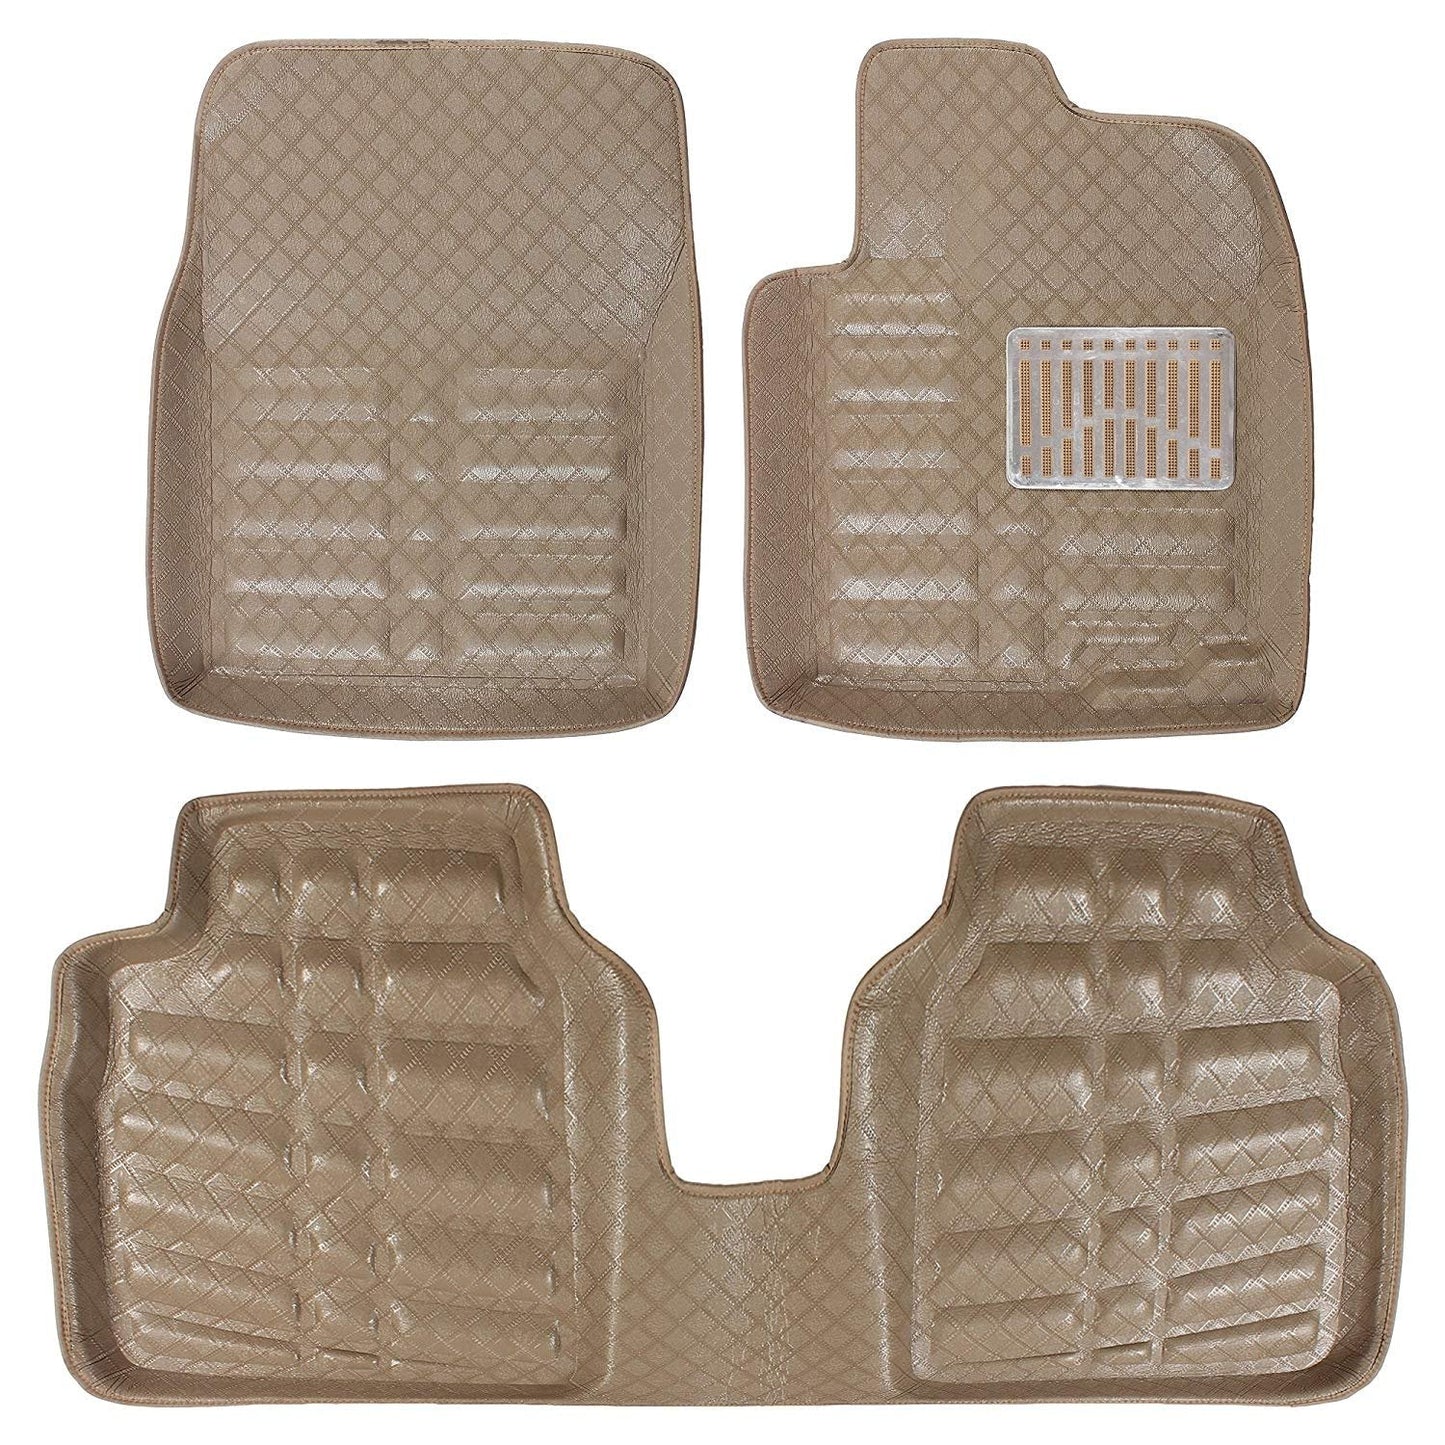 Oshotto 4D Artificial Leather Car Floor Mats For Maruti Suzuki Brezza - Set of 3 (2 pcs Front & one Long Single Rear pc) - Beige